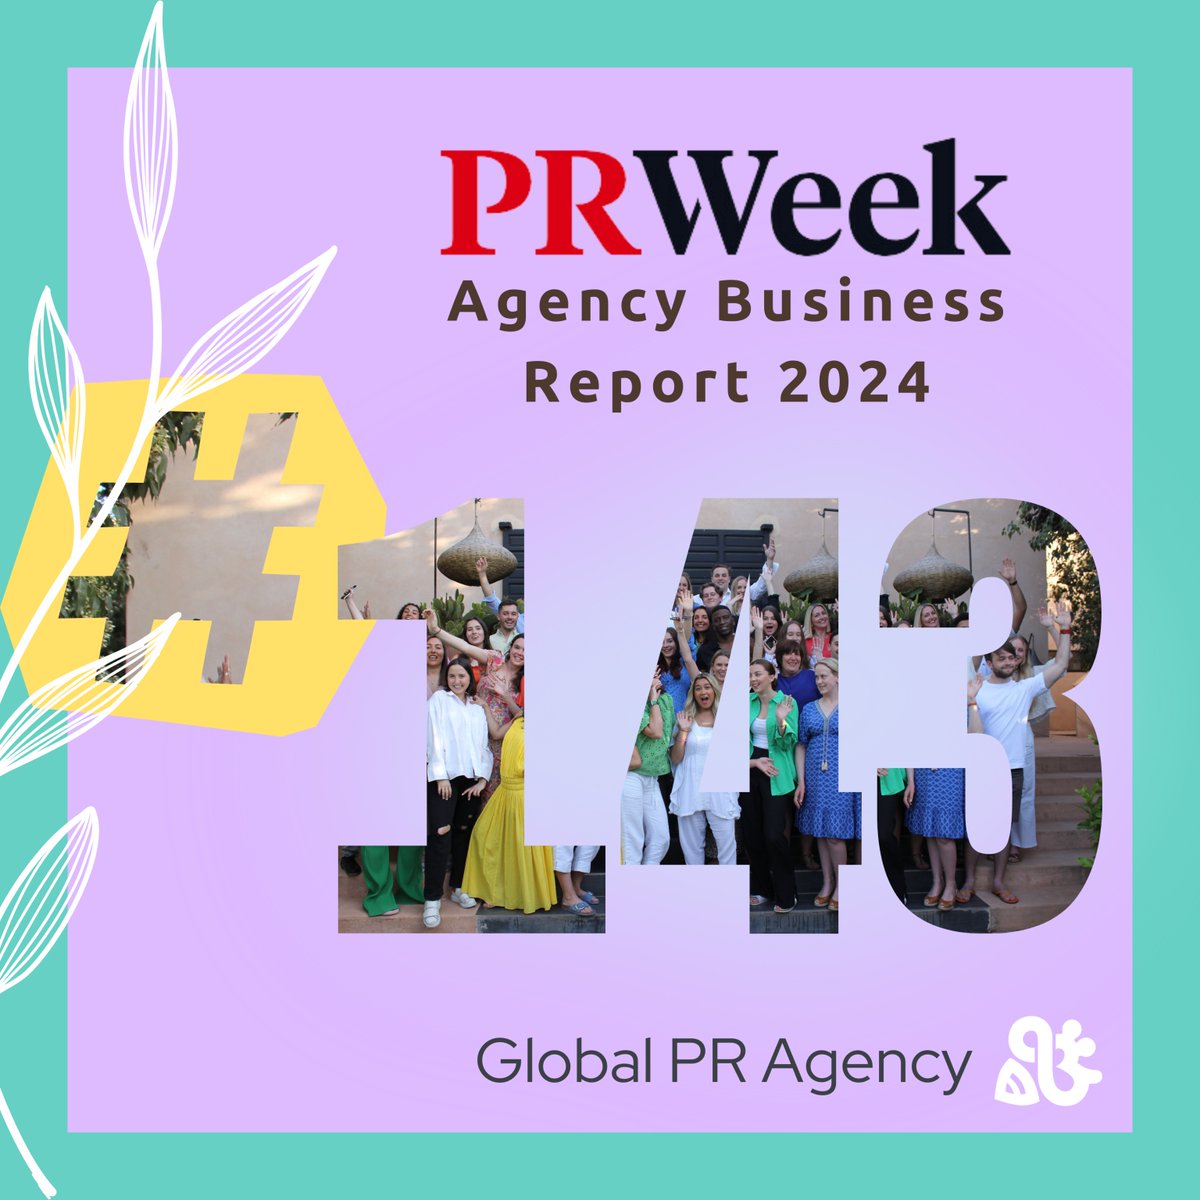 Spring has sprung and Milk & Honey leaps up #PRWeek's global rankings!

We've jumped eight places on last year - from #151 to #143 - to burst into the top 150 #global agencies.

Discover the latest insights from PRWeek's Agency Business Report 2024: 👉 ow.ly/tB1b50Rskzr